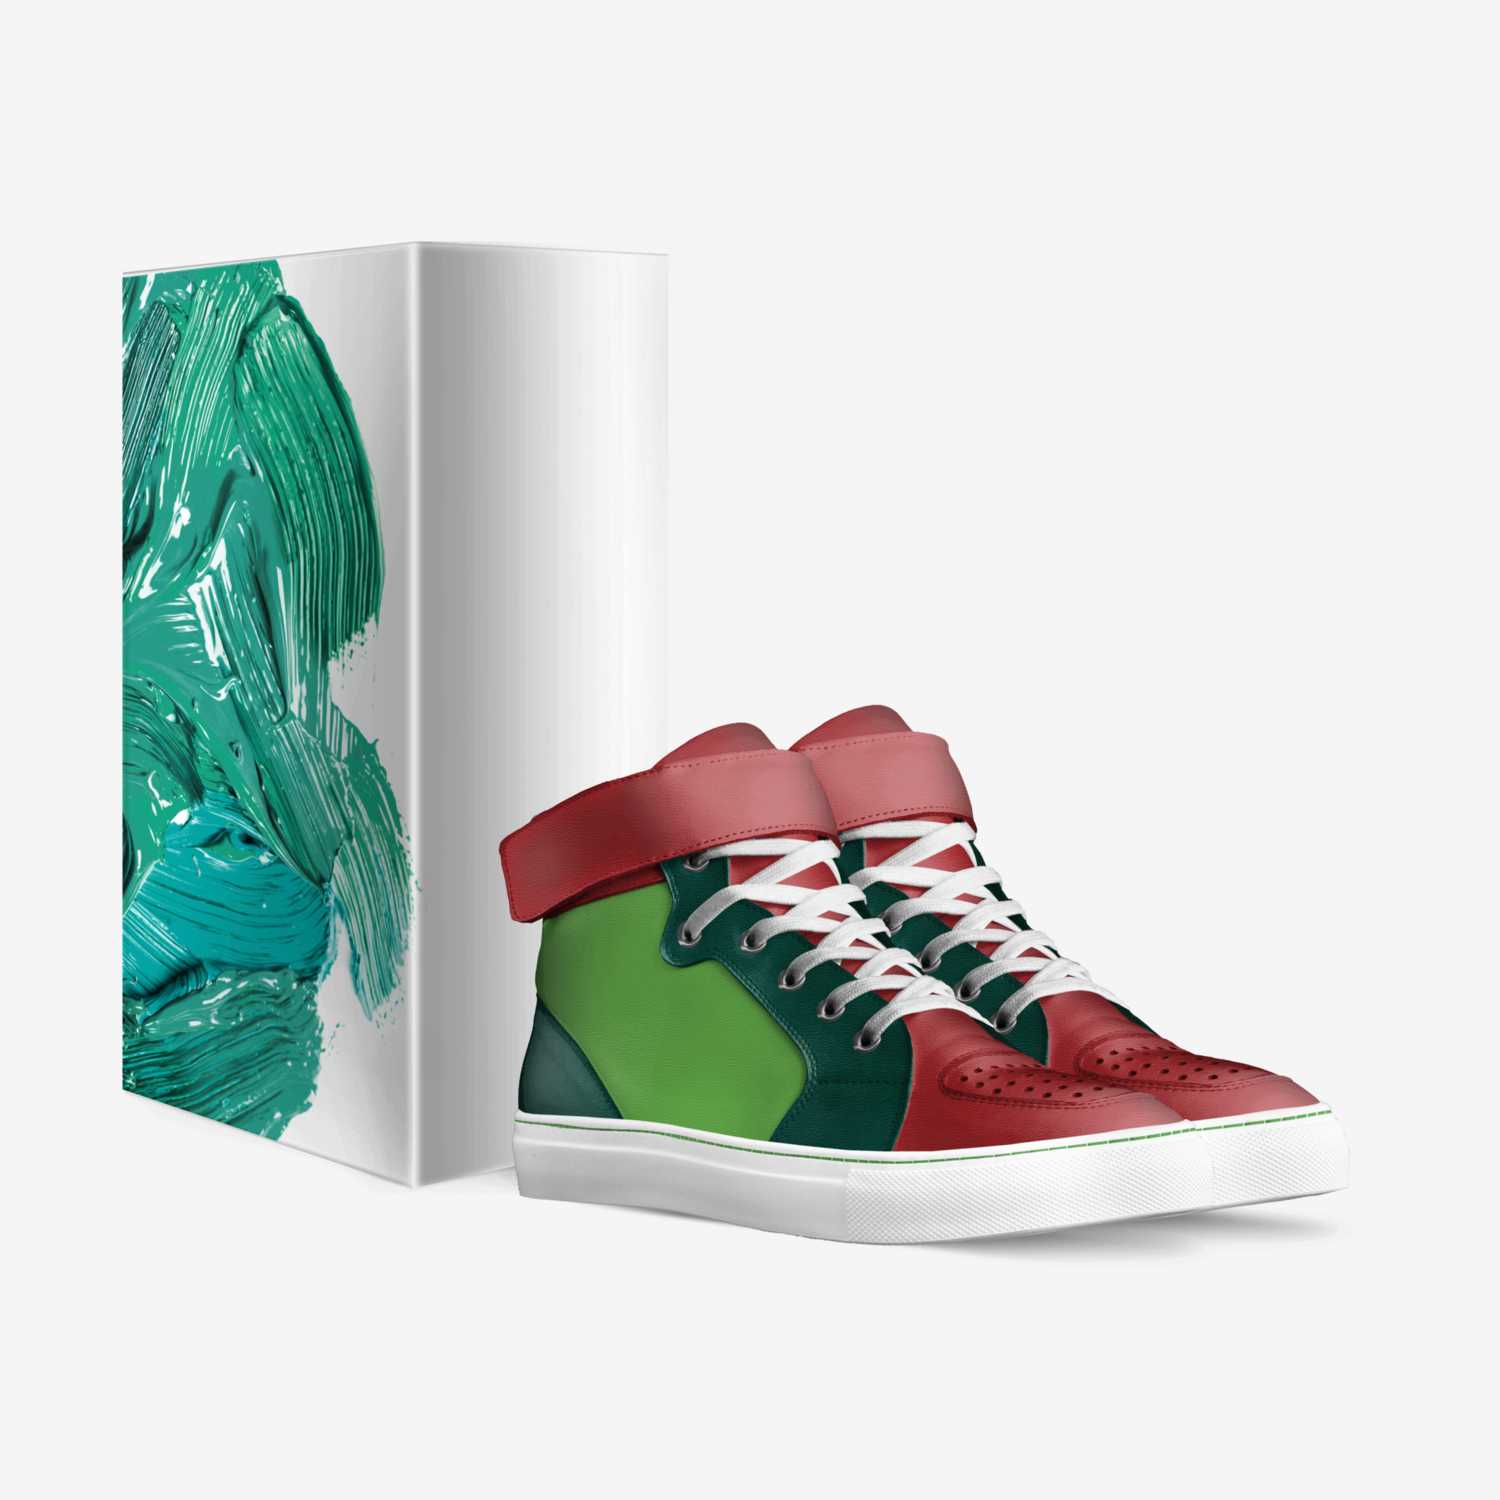 mtndew custom made in Italy shoes by Patrick Smith | Box view